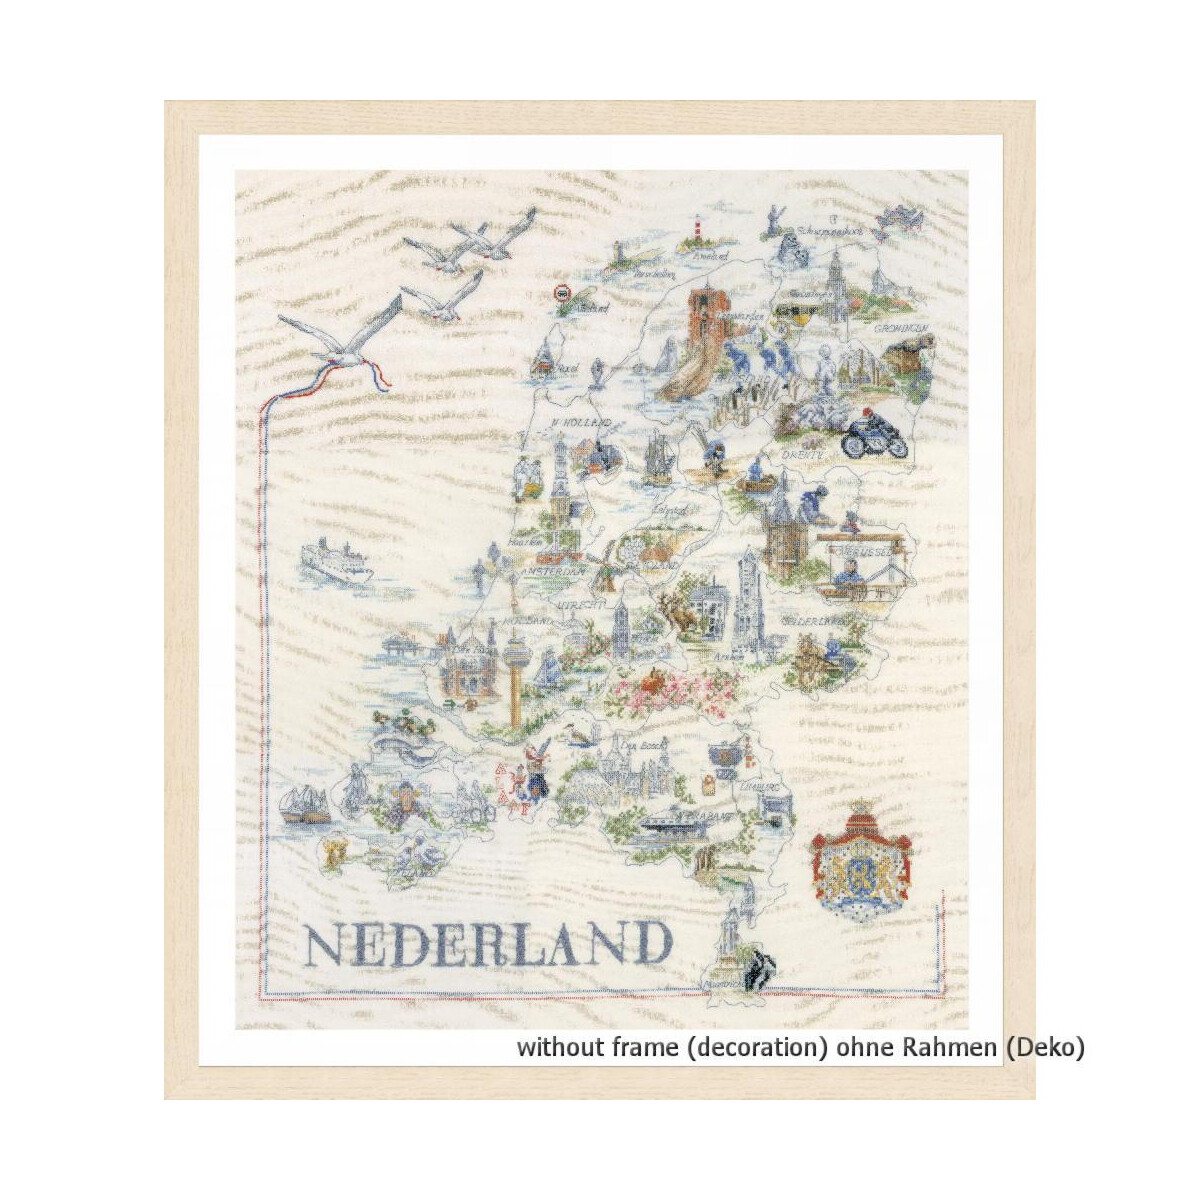 A colorful illustrated map of the Netherlands with...